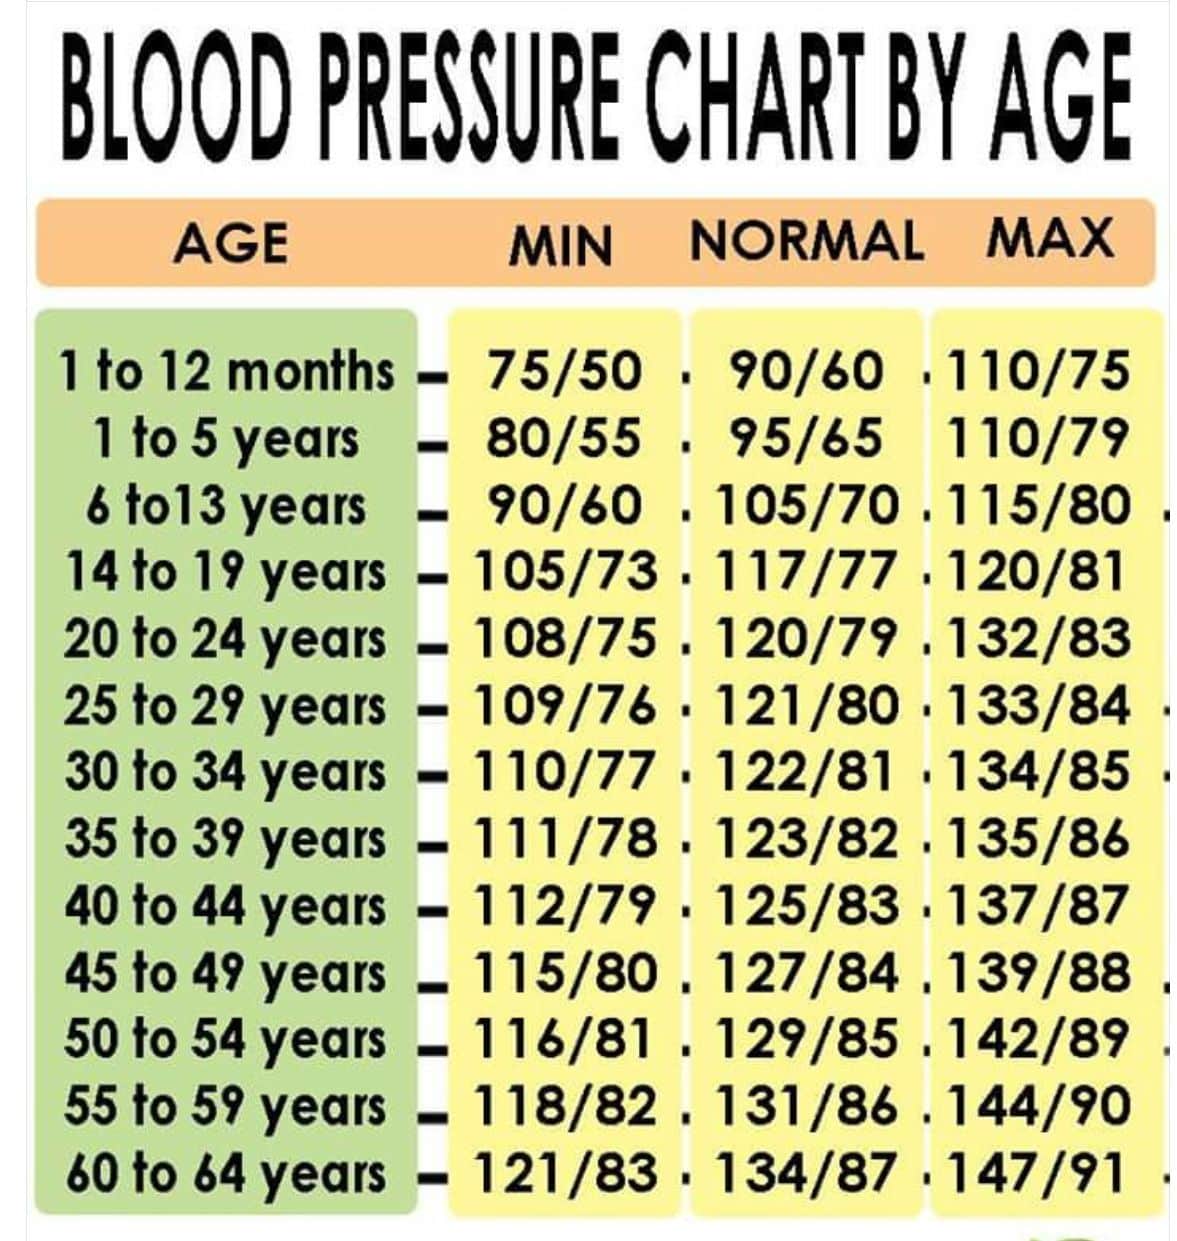 What Should A 72 Year Old Blood Pressure Be